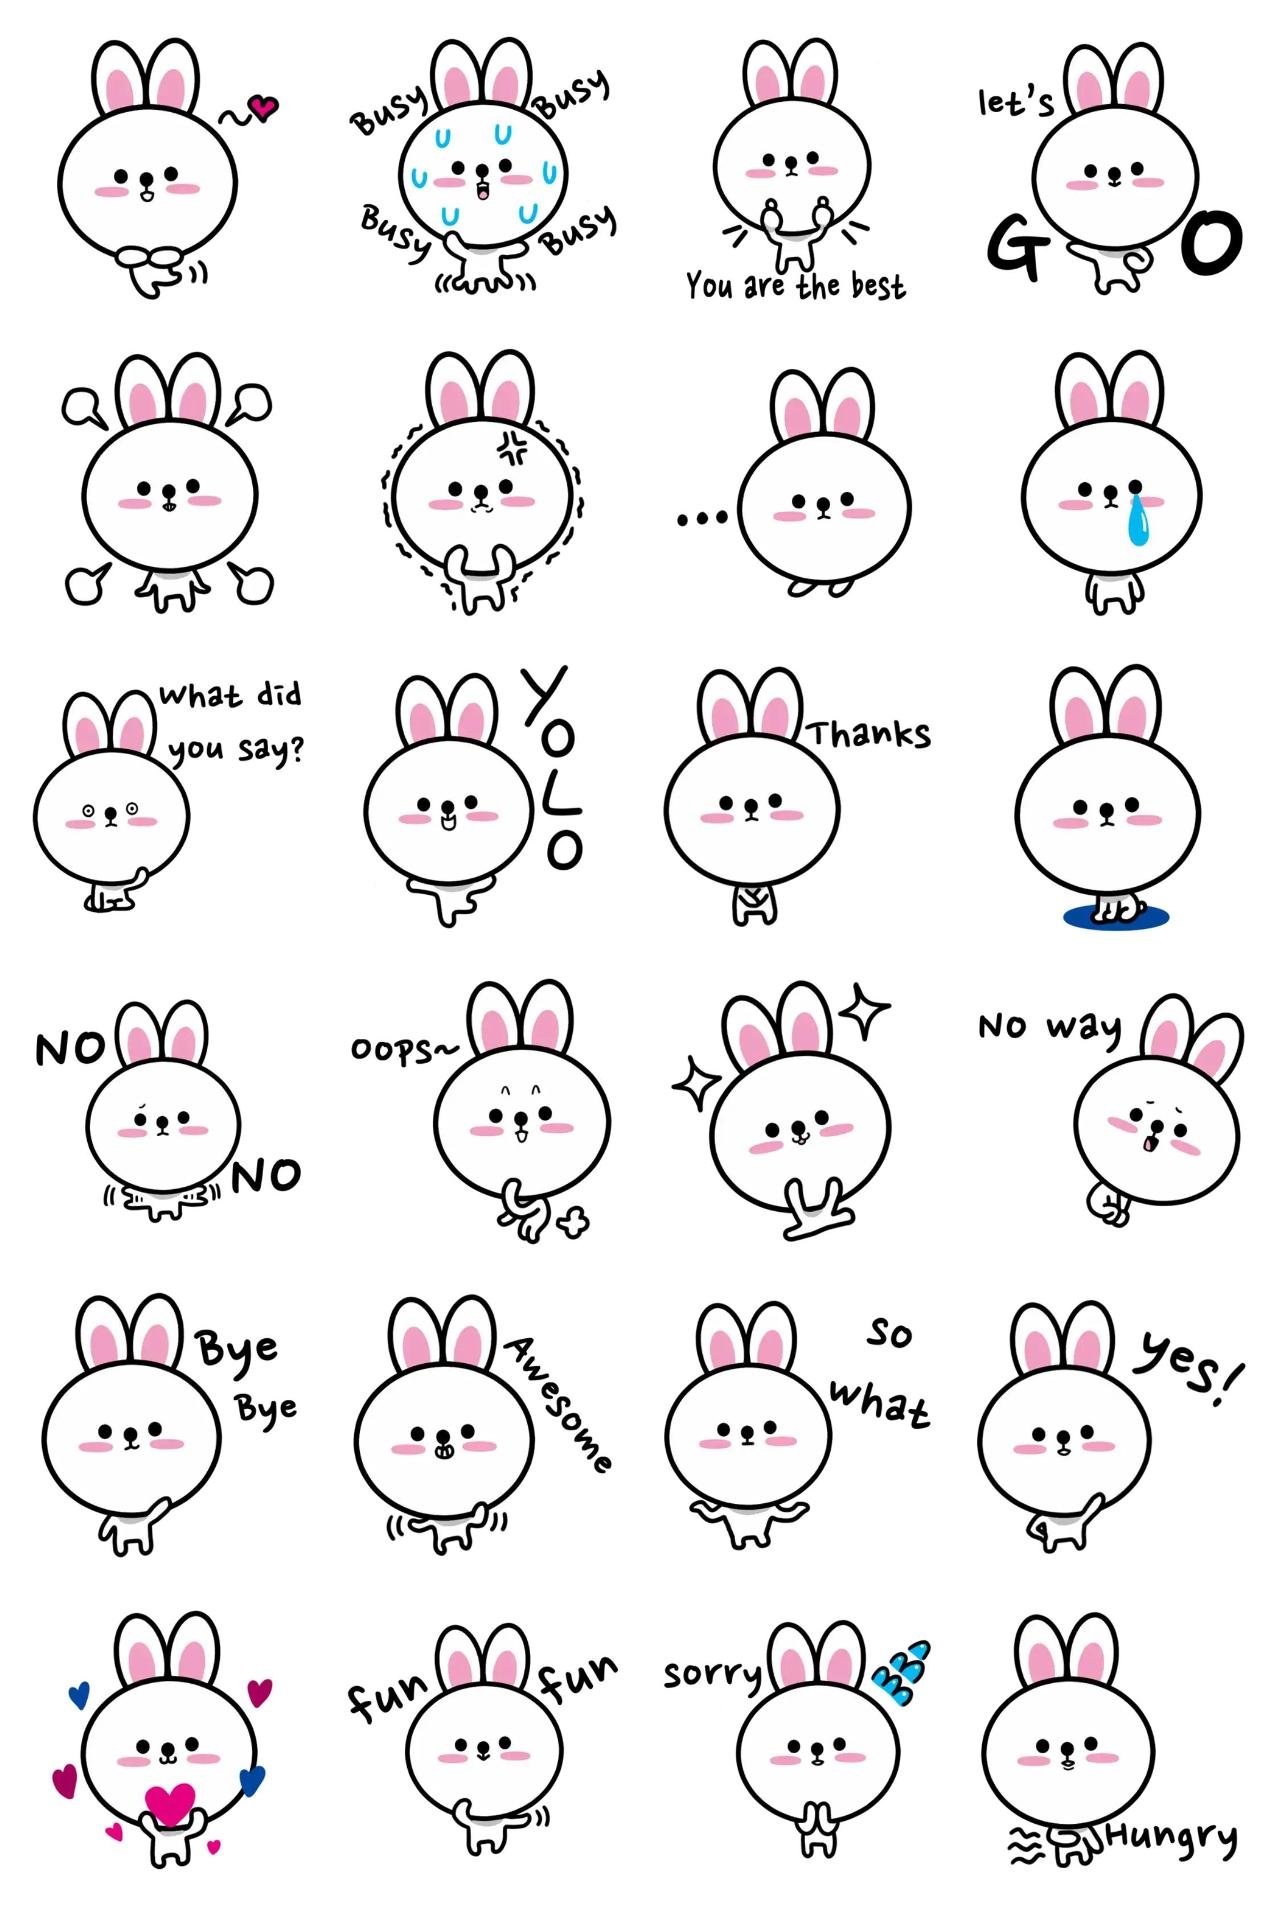 Cute Big Face Rabbit Animation/Cartoon,Animals sticker pack for Whatsapp, Telegram, Signal, and others chatting and message apps